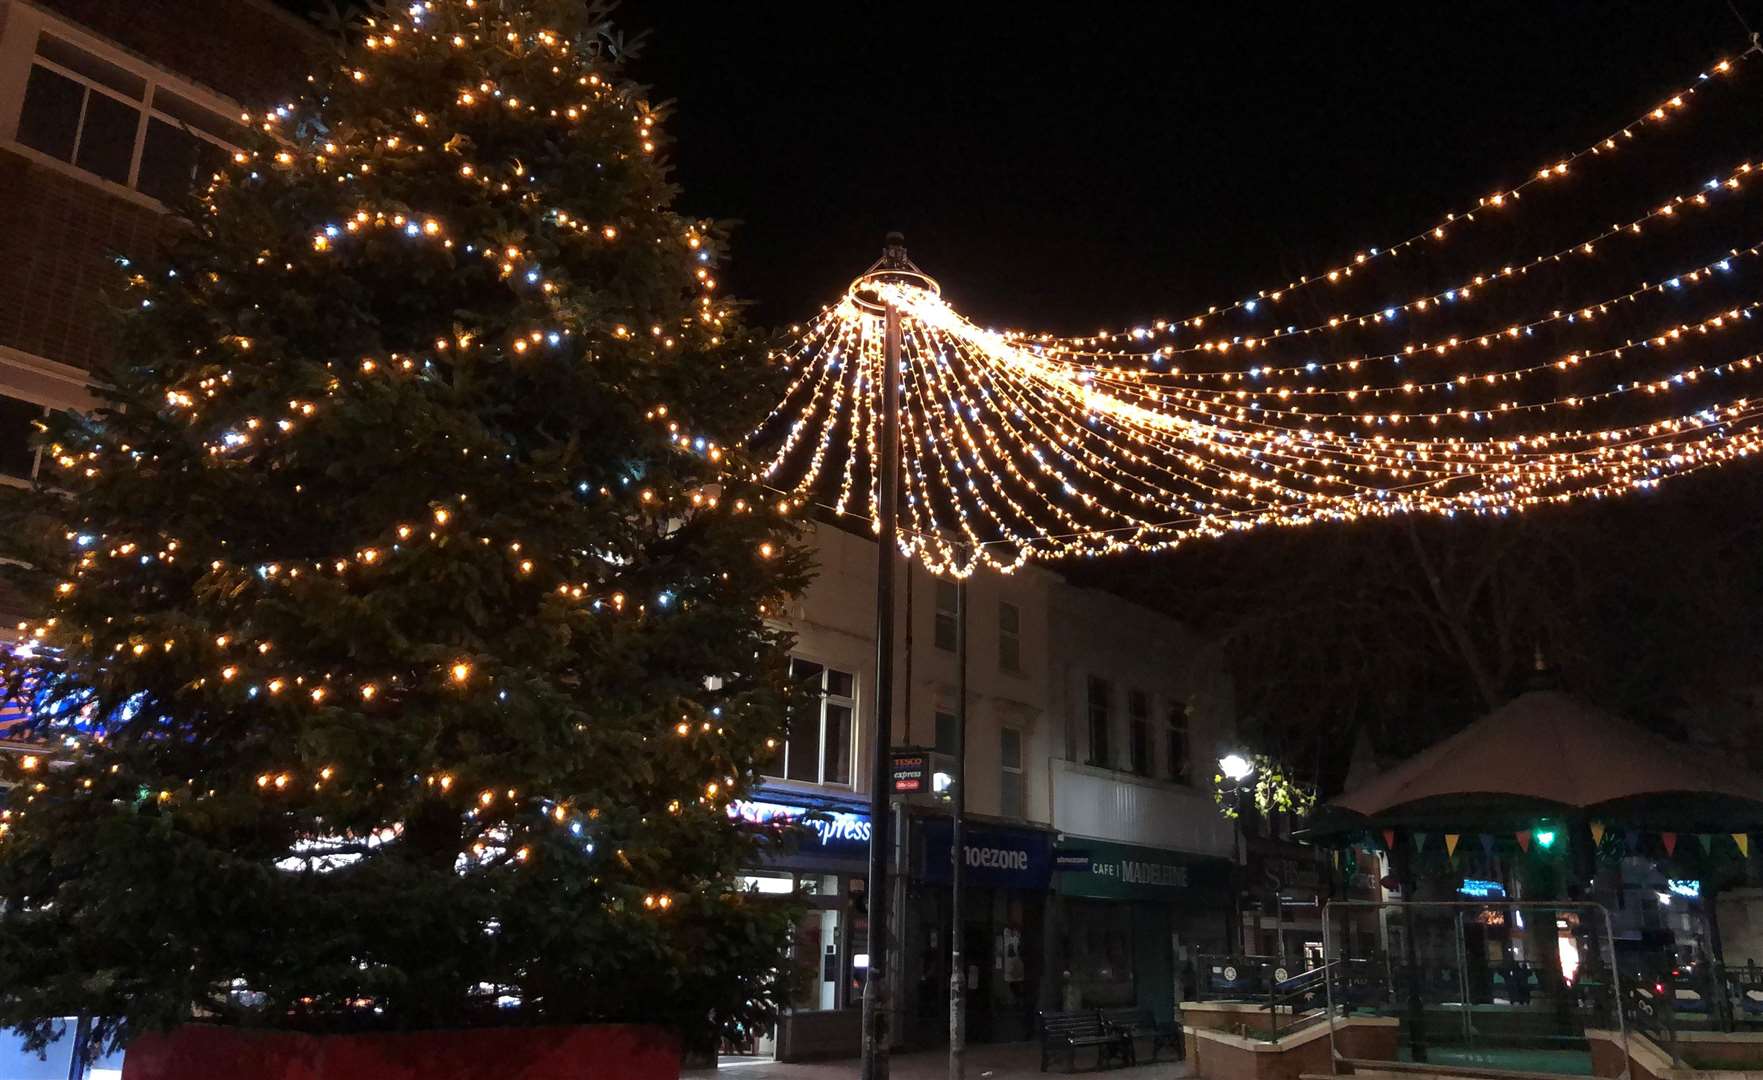 Some towns have cancelled their switch-on events this Christmas due to budget cuts. Picture: Gala Lights